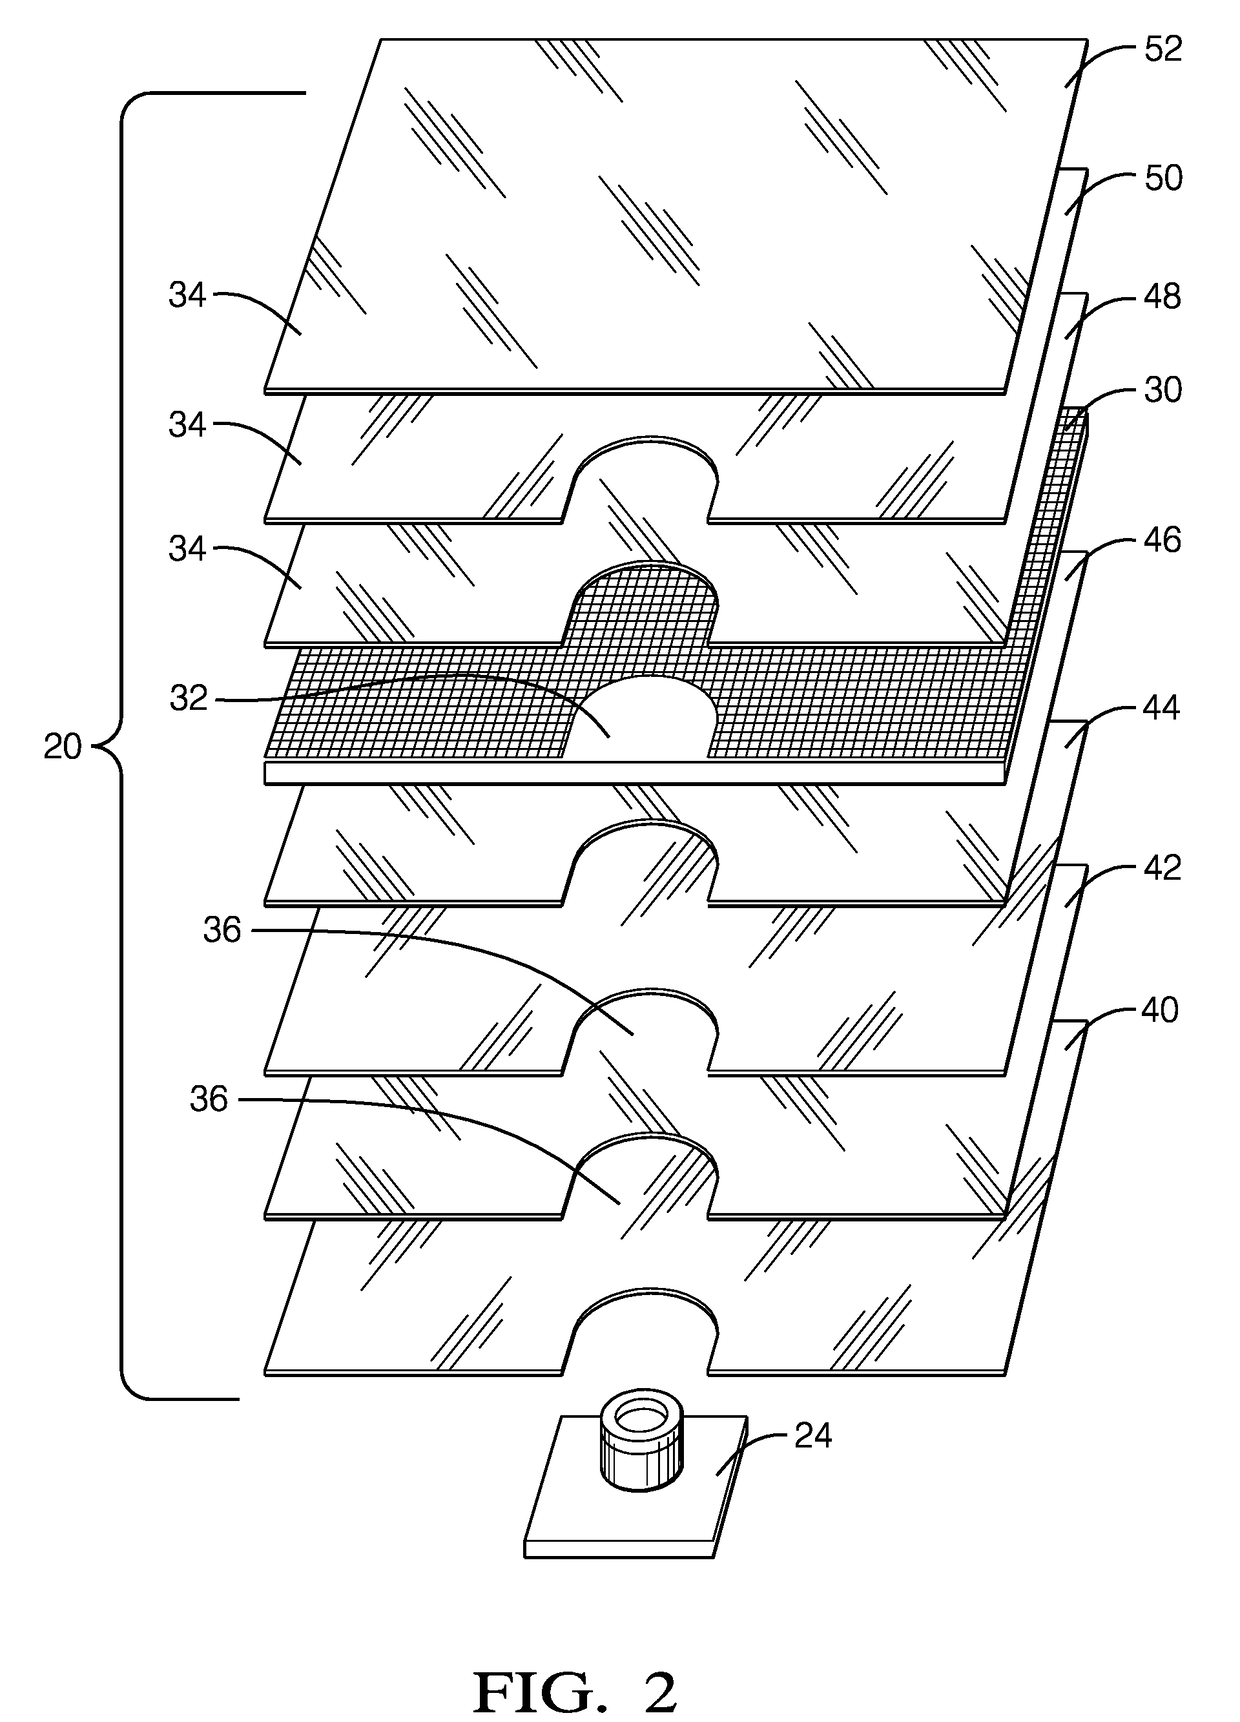 Reconfigurable display with camera aperture therethrough